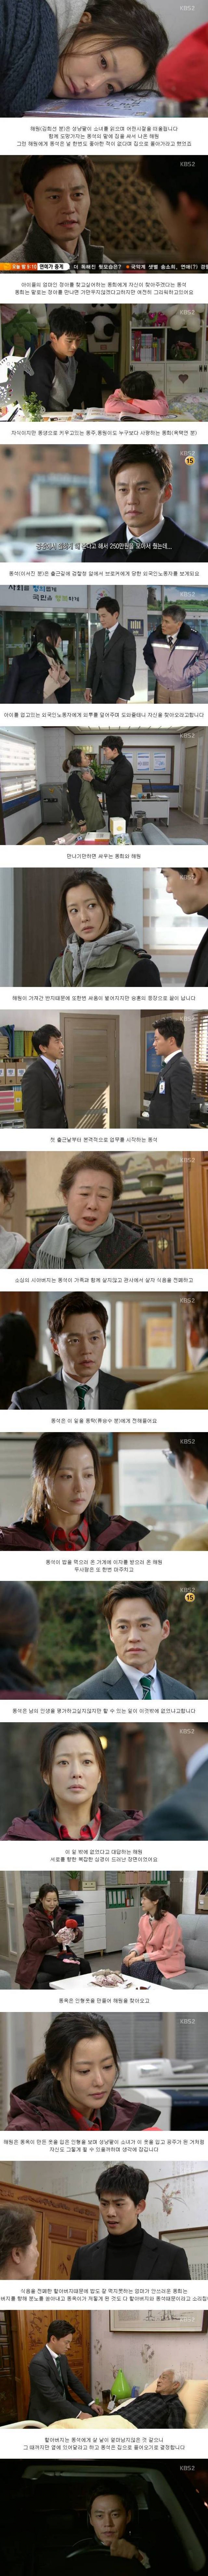 episodes 3 and 4 captures for the Korean drama 'Very Good Times'